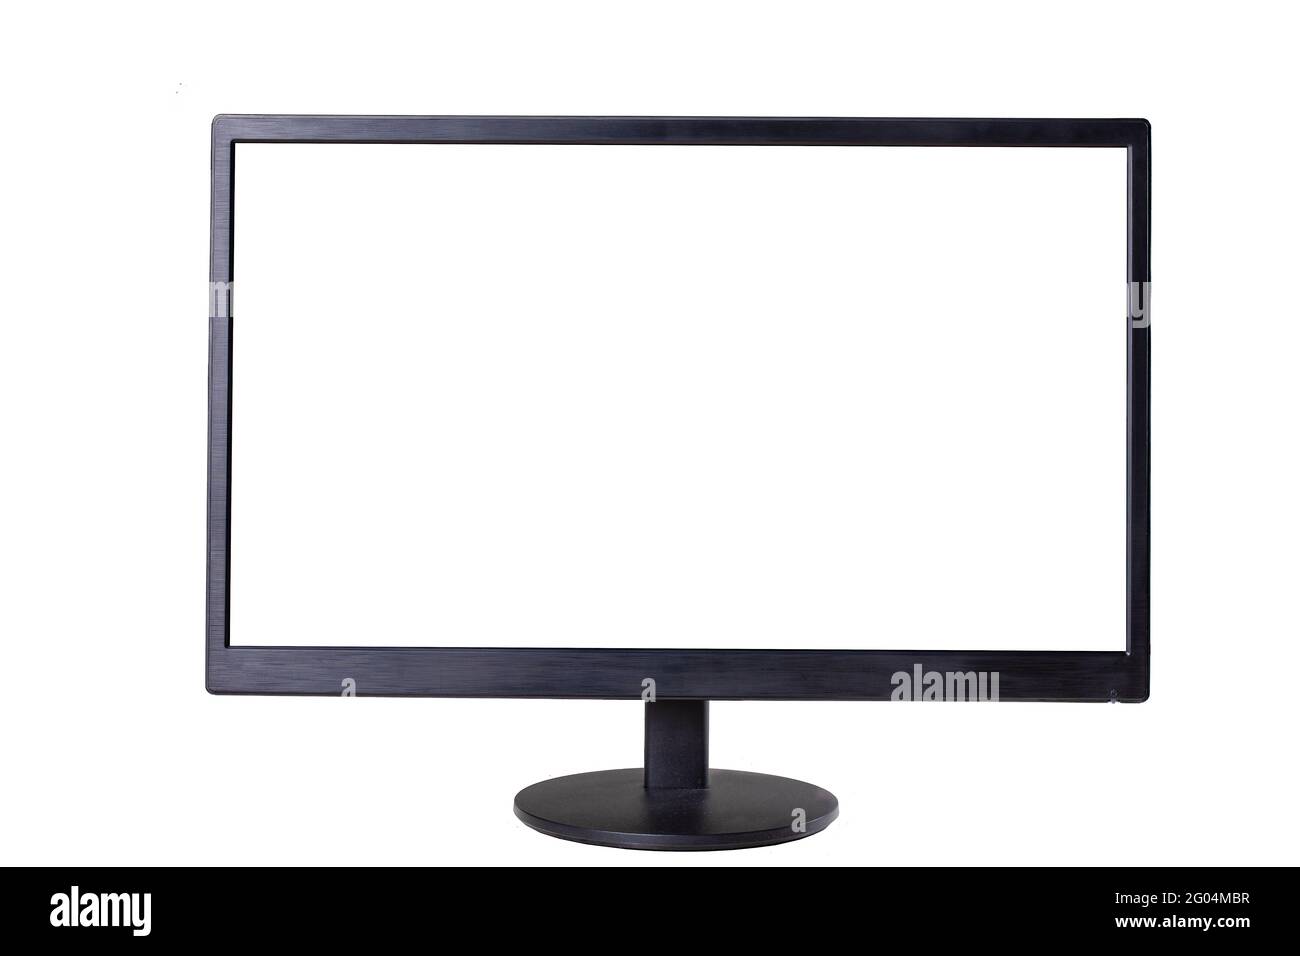 LCD monitor with space for graphics. Computer apparatus for displaying an image. Isolated background. Stock Photo